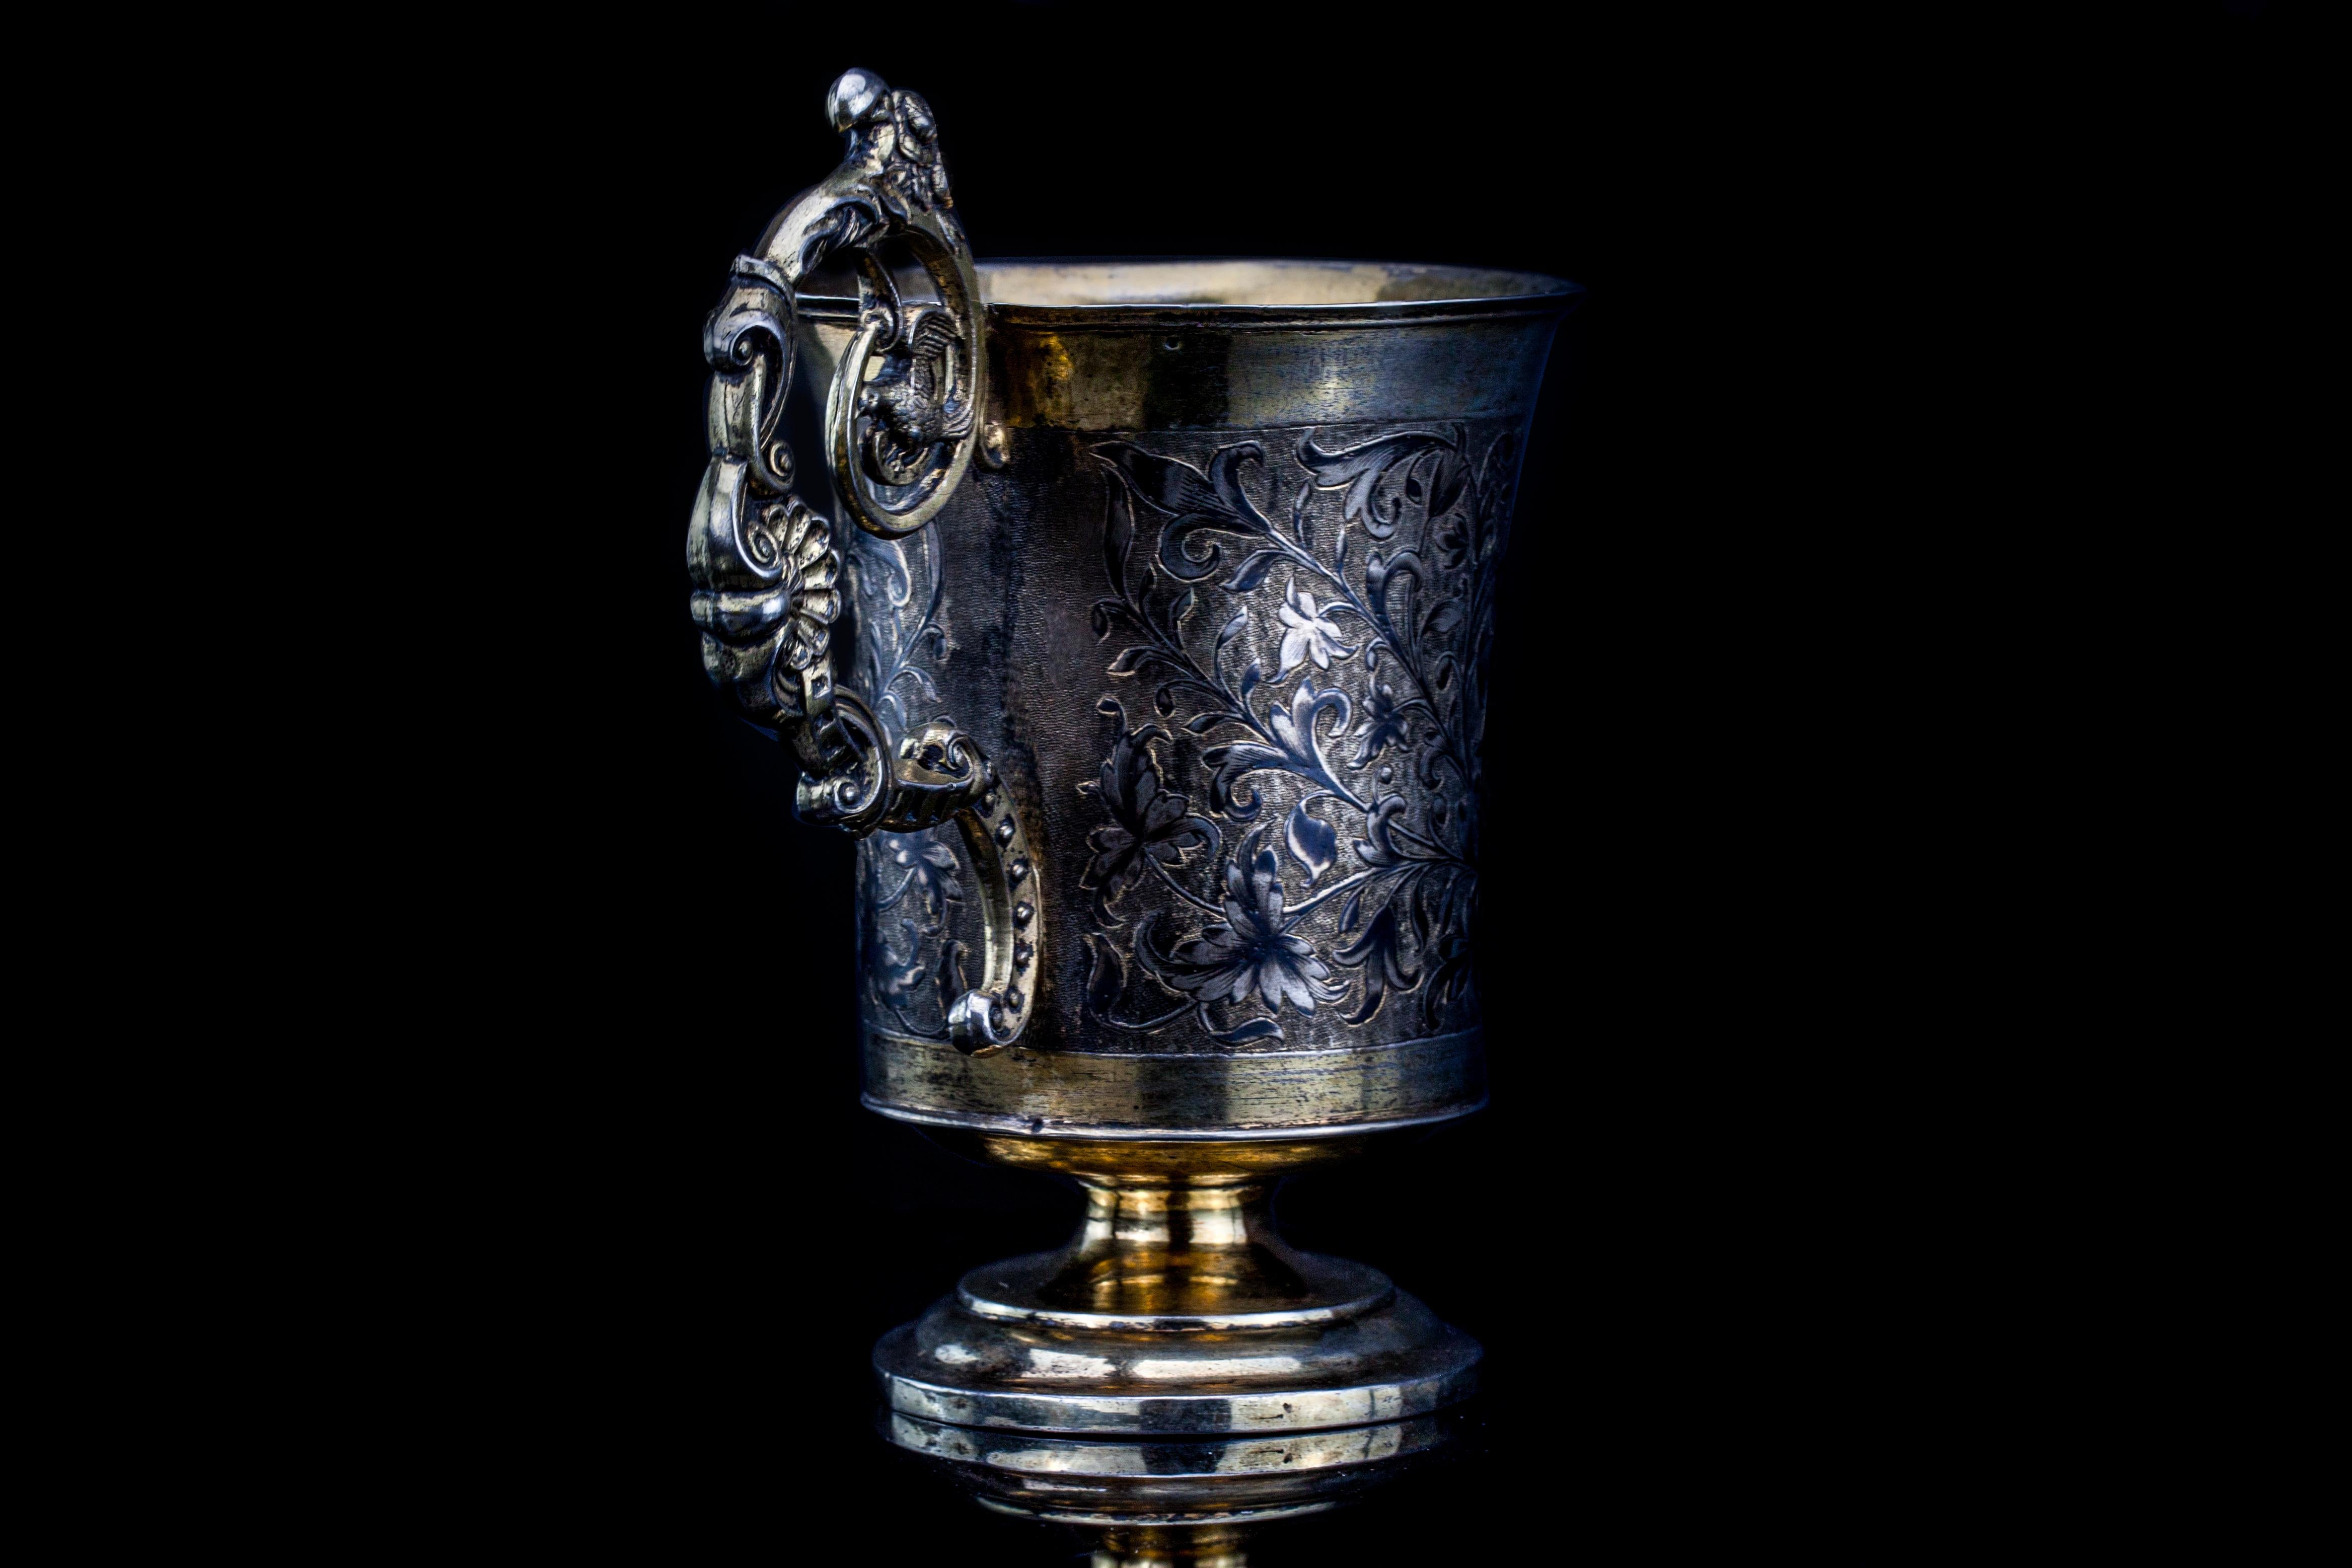 Antique silver gilt and niello tankard with peter the great on a horse scenery
Made in Russia, Moscow, 19th century
Assay maker: Andrey Antonovich Kovalsky
Maker: Unidentified
Russian standard Zolotnick 84 / 875